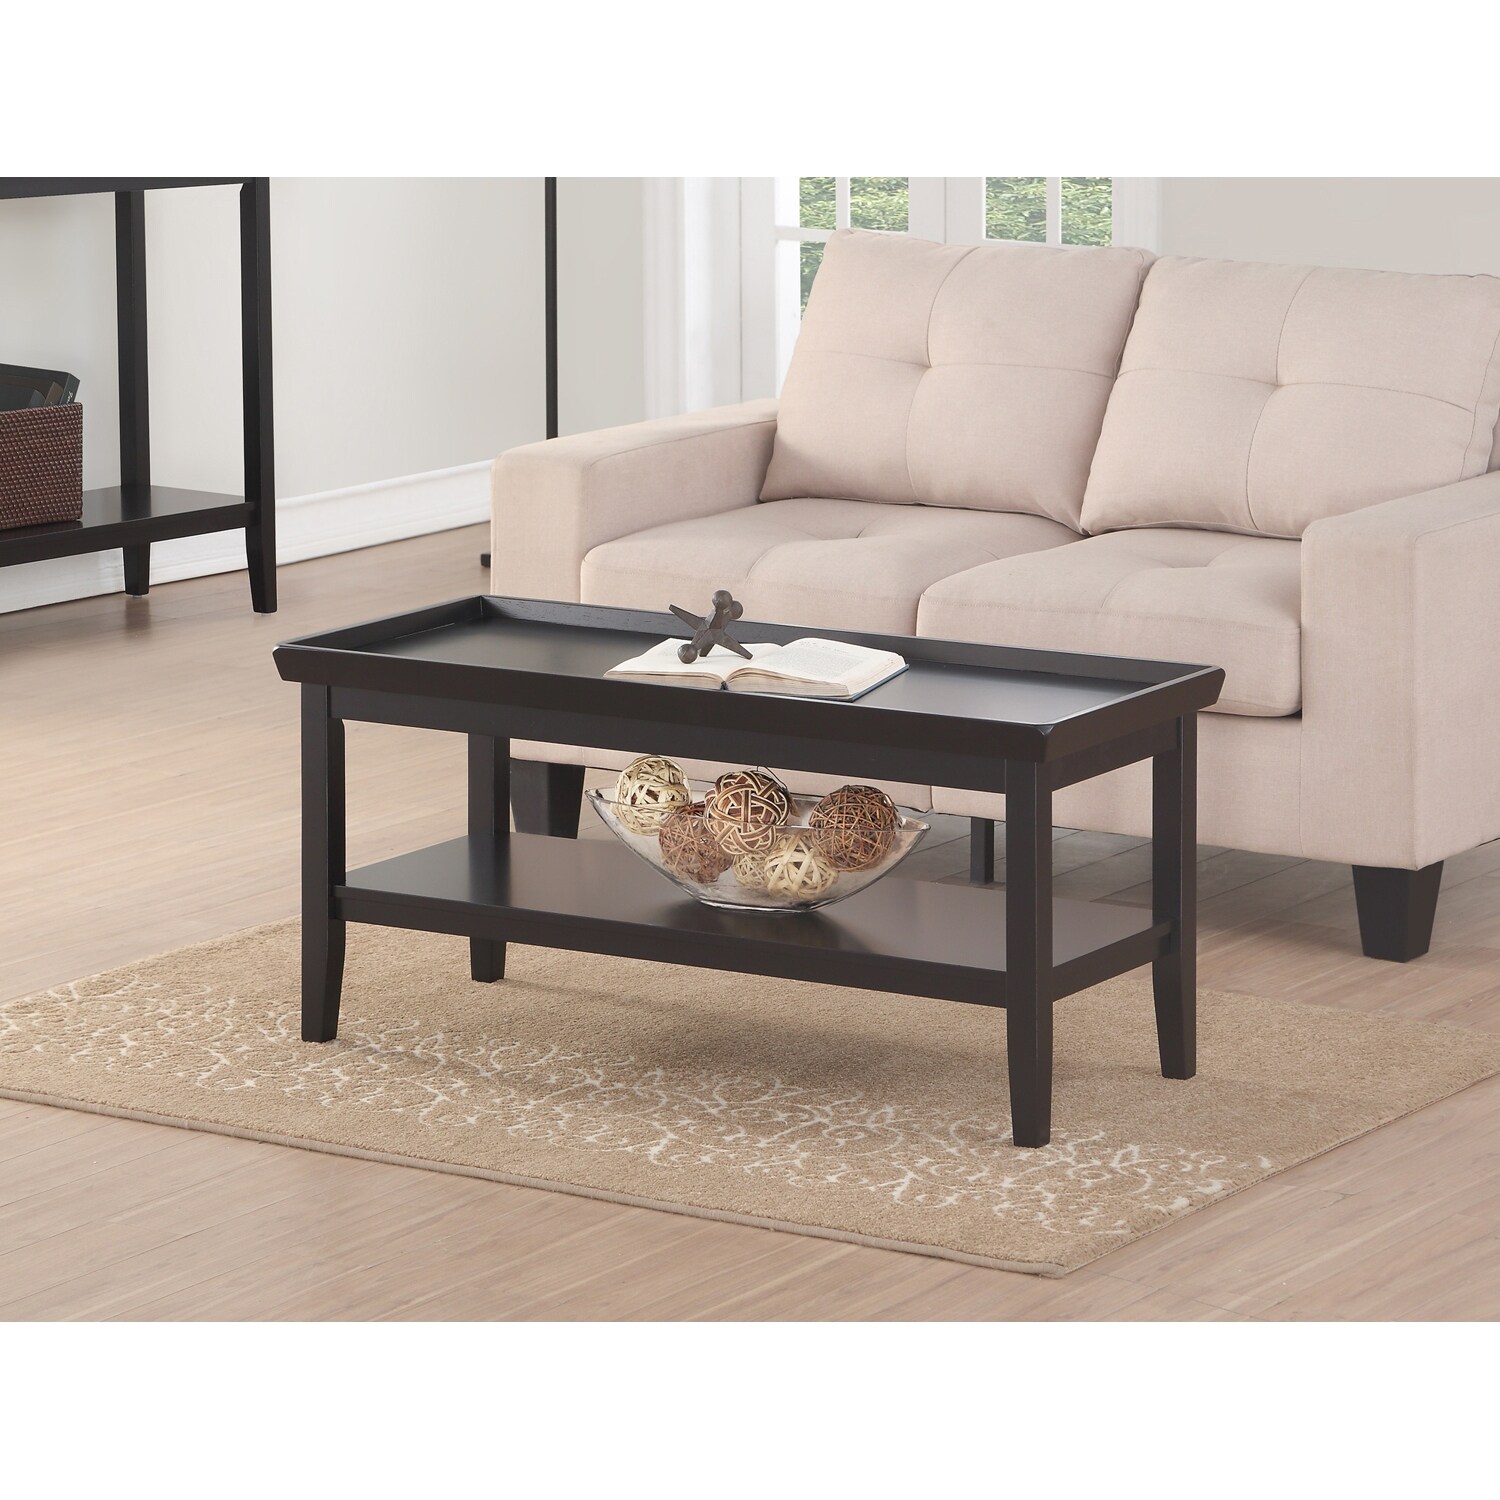 Concepts Ledgewood Coffee Table Bed Bath  Beyond 37245682